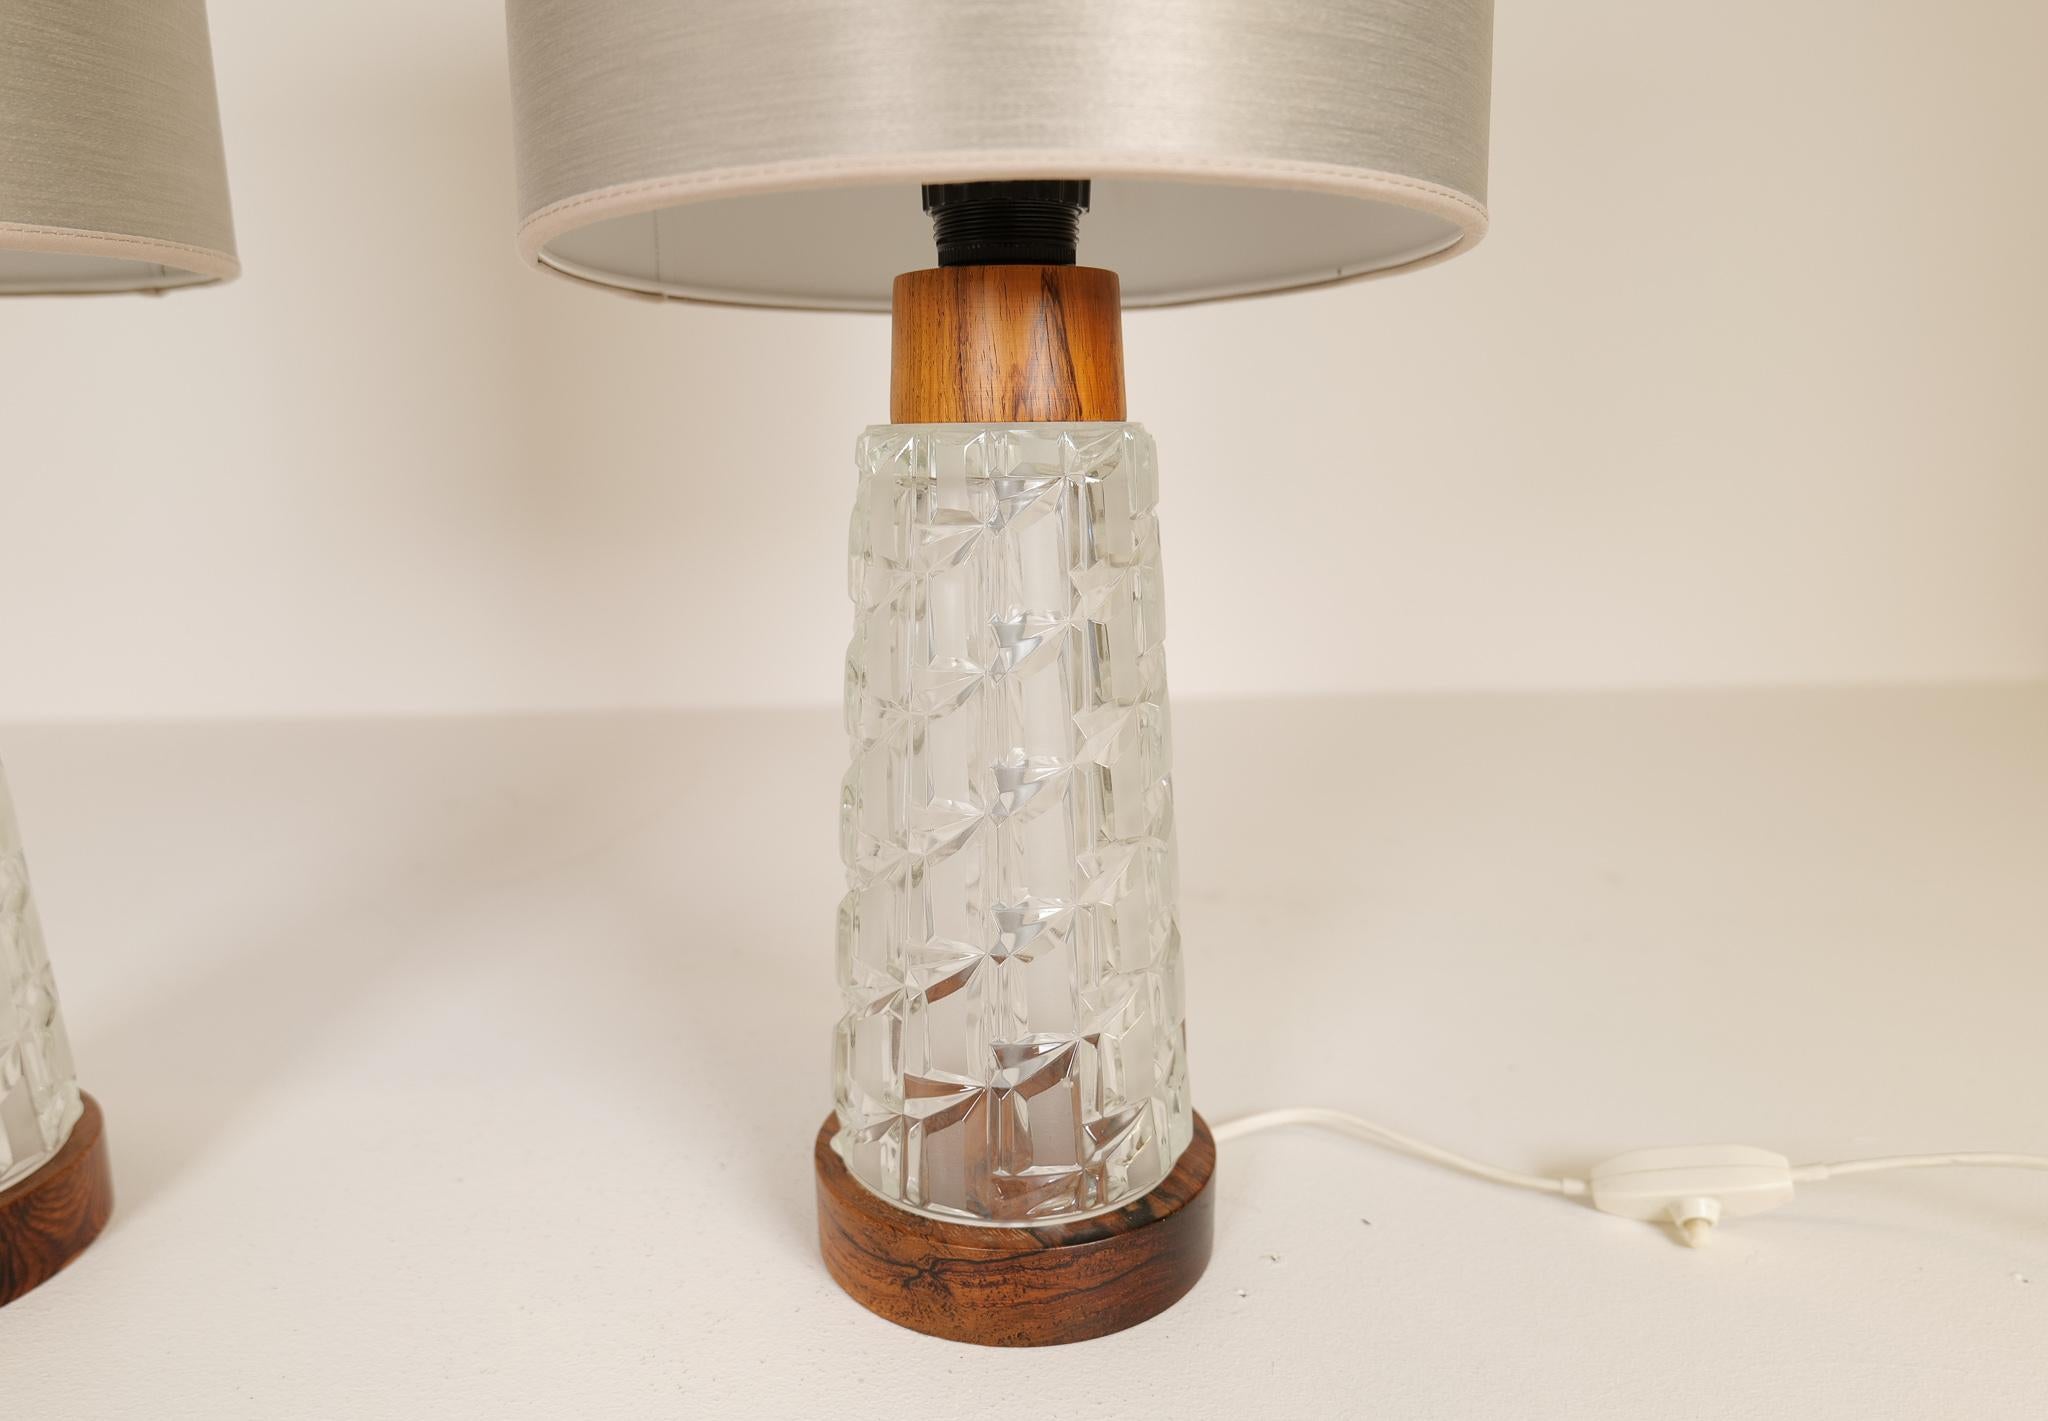 Midcentury Table Lamps Orrefors Teak and Glass Sweden In Good Condition For Sale In Hillringsberg, SE